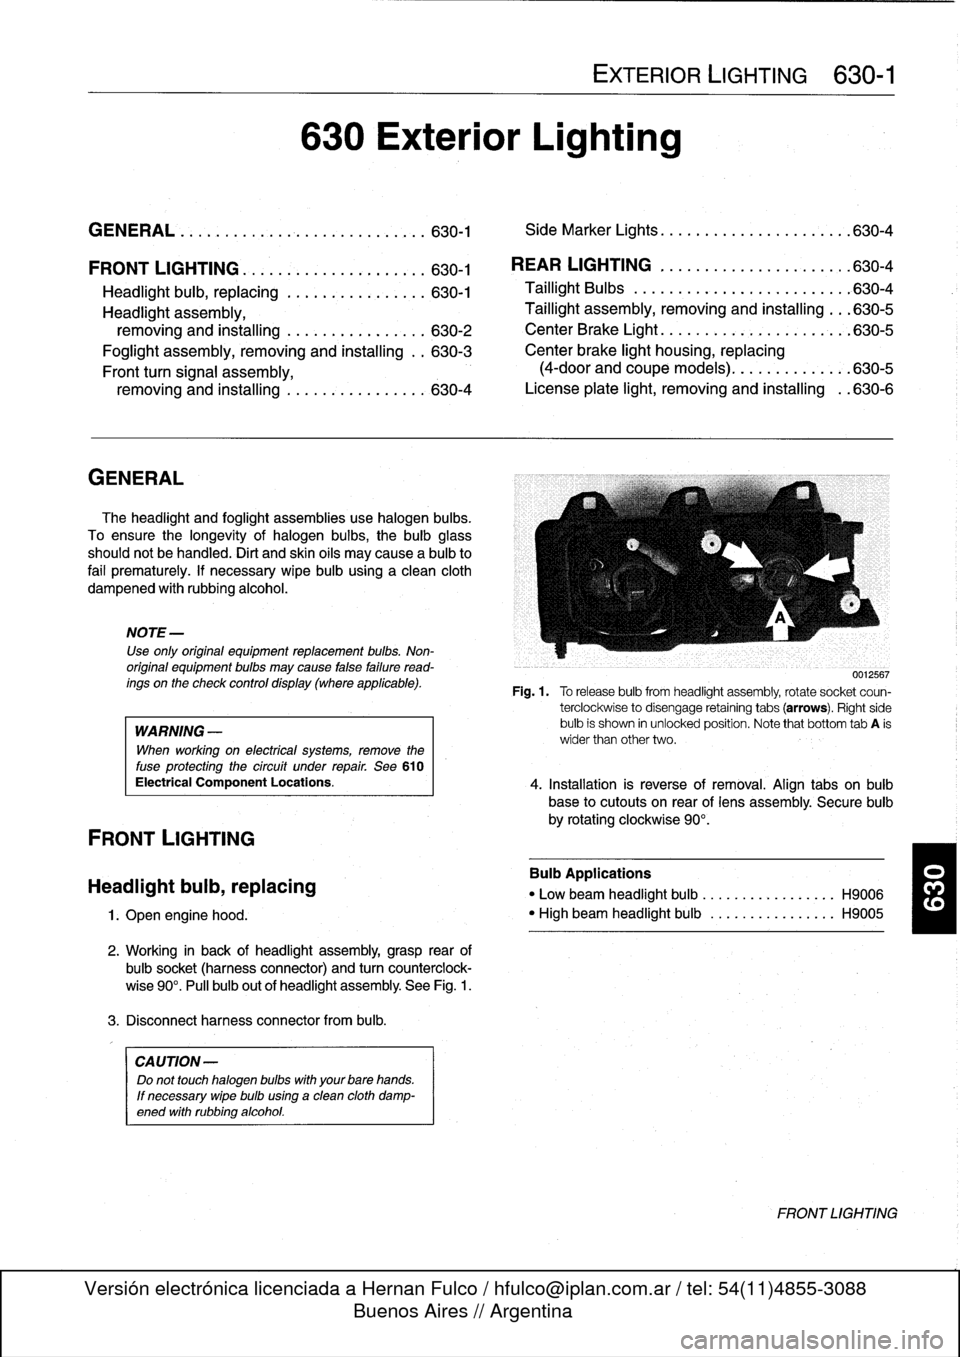 BMW 328i 1994 E36 Workshop Manual 
FRONT
LIGHTING
.
...........
.
....
.
.
.
.
630-1

Headlight
buib,
replacing
............
.
.
.
.
630-1
Headlight
assembly,

removing
and
installing
.......
.
....
.
.
.
.
630-2

Foglight
assembly,
r